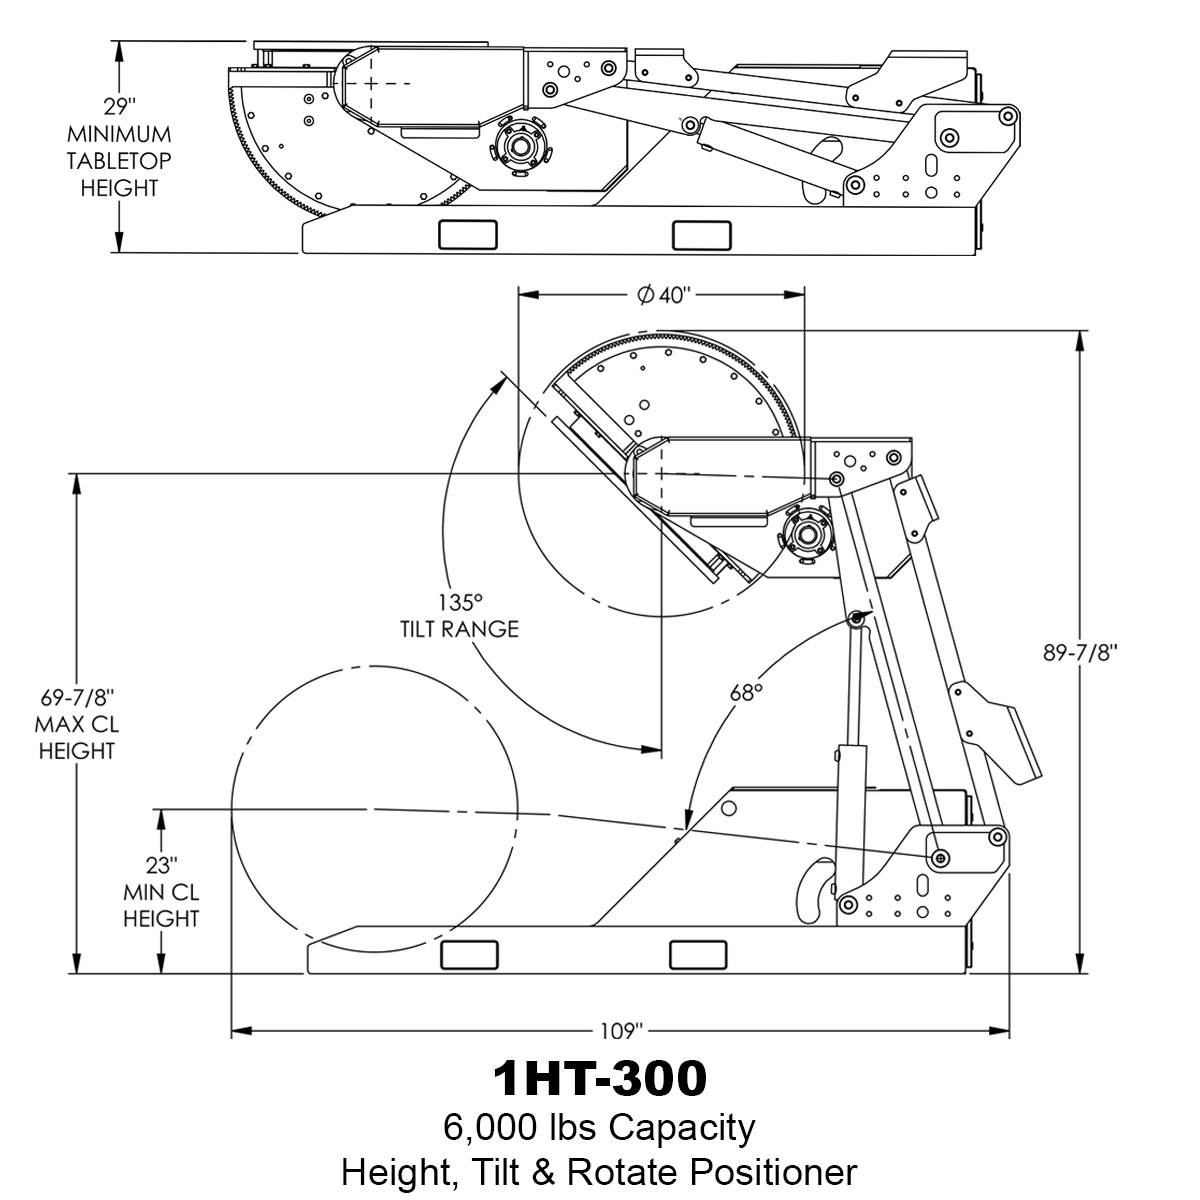 1HT-300 Positioner Technical Drawing